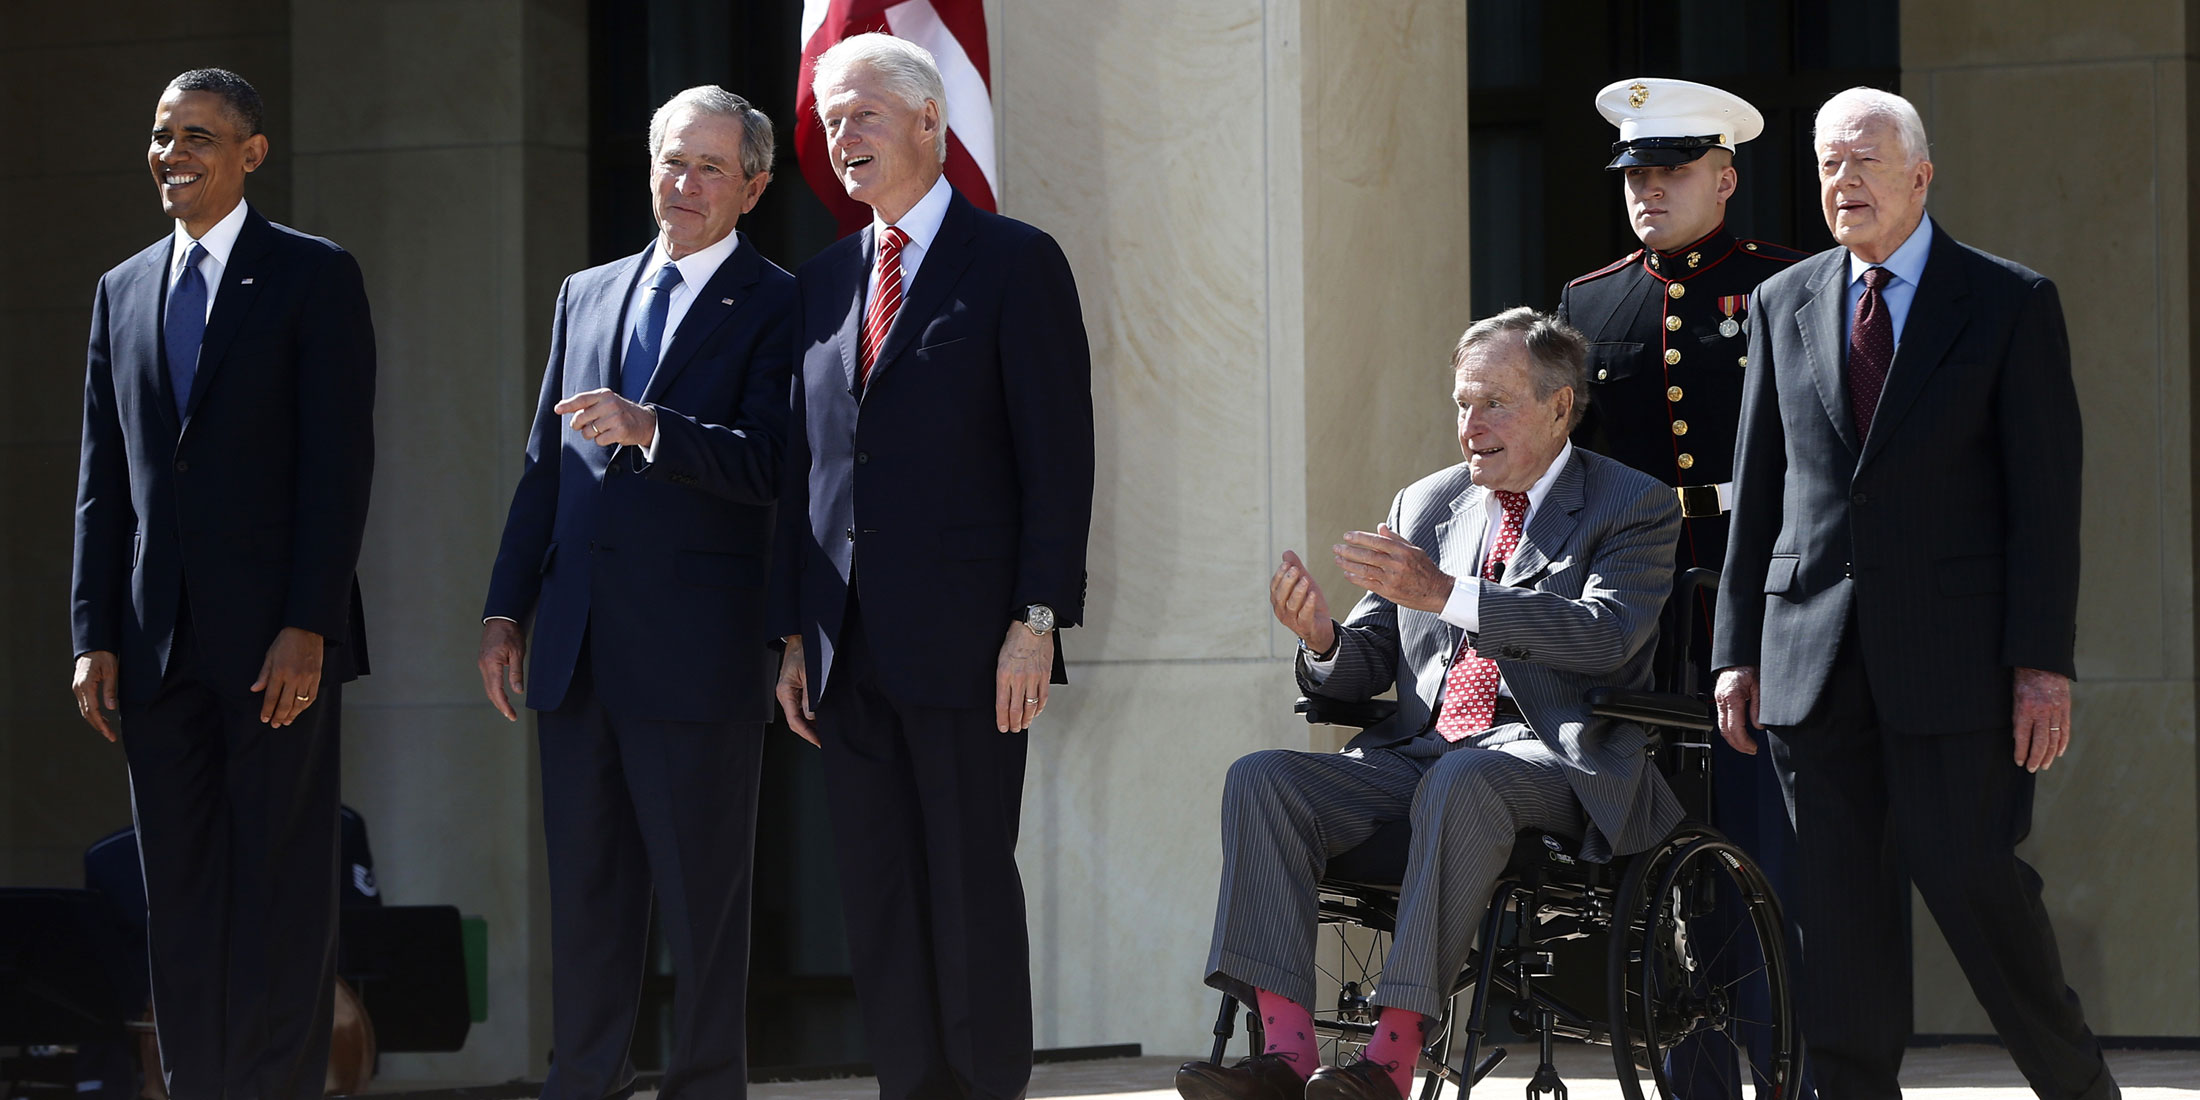 The Five Presidents at the Bush Center